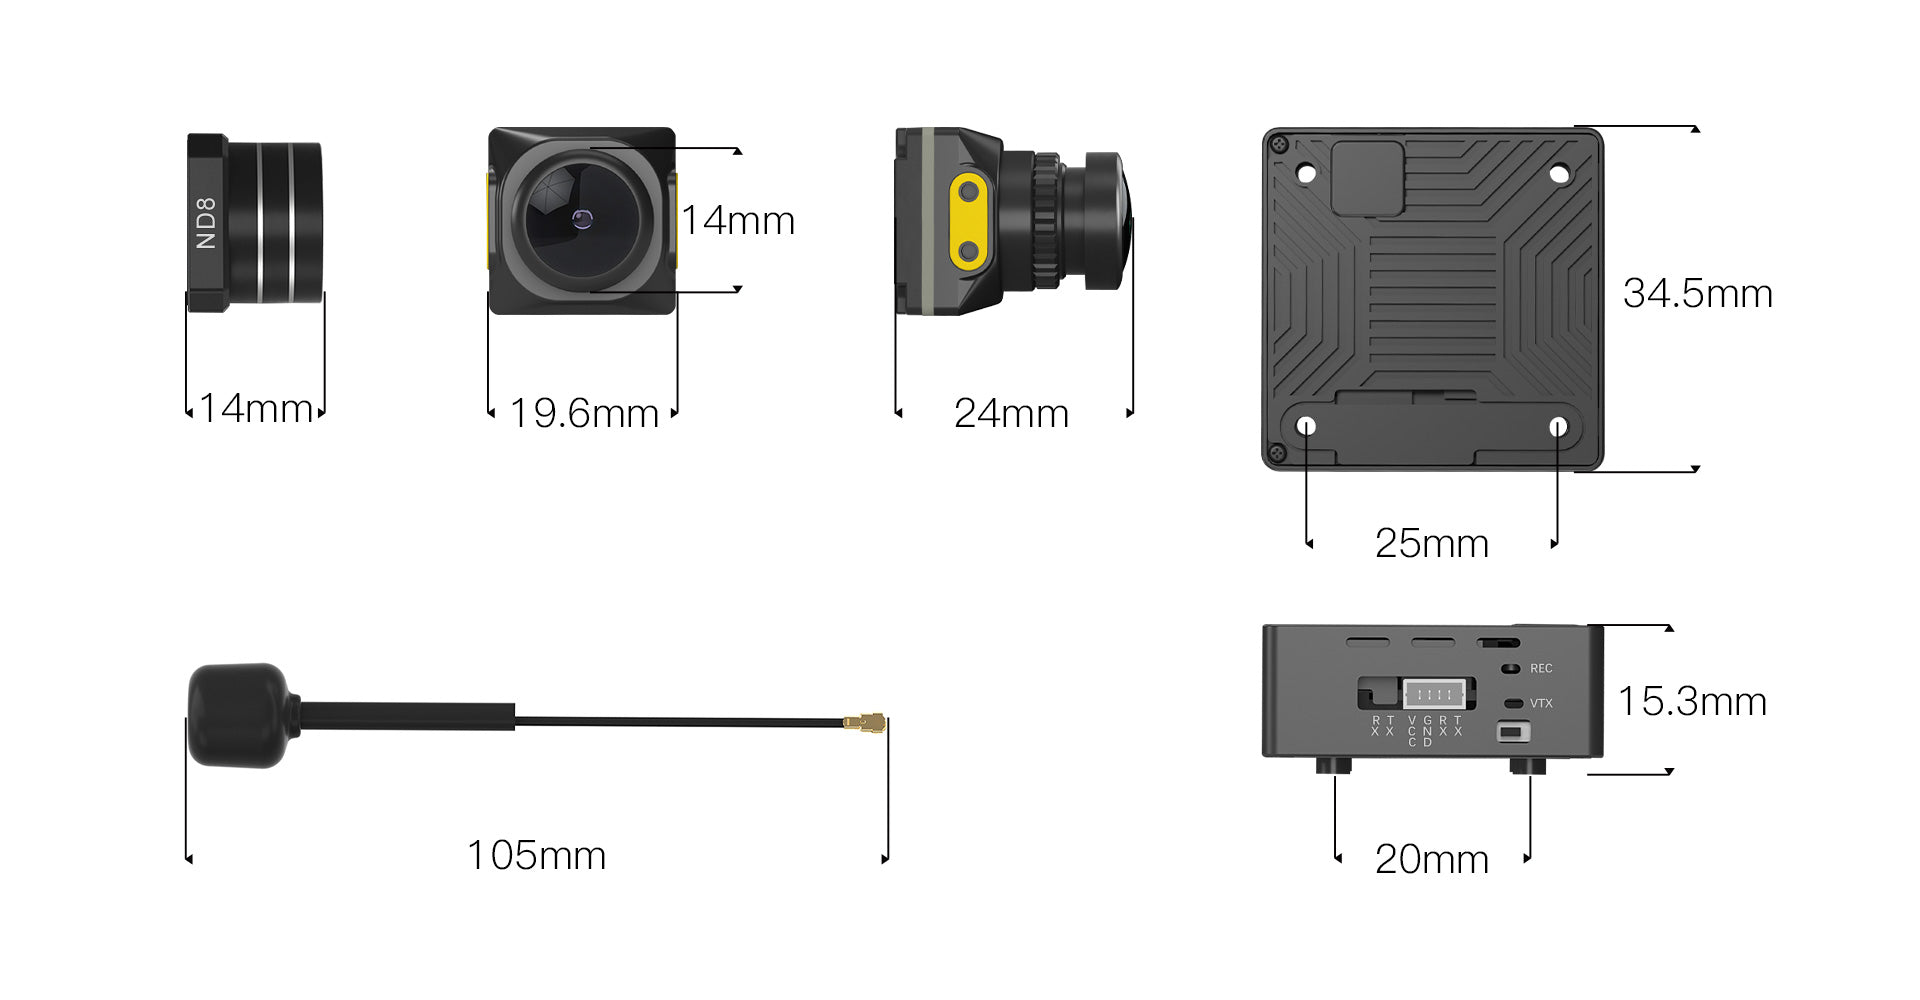 Walksnail Moonlight kit, shooting stable and HD videos without unnecessary latency, bring pilots a smoother FP